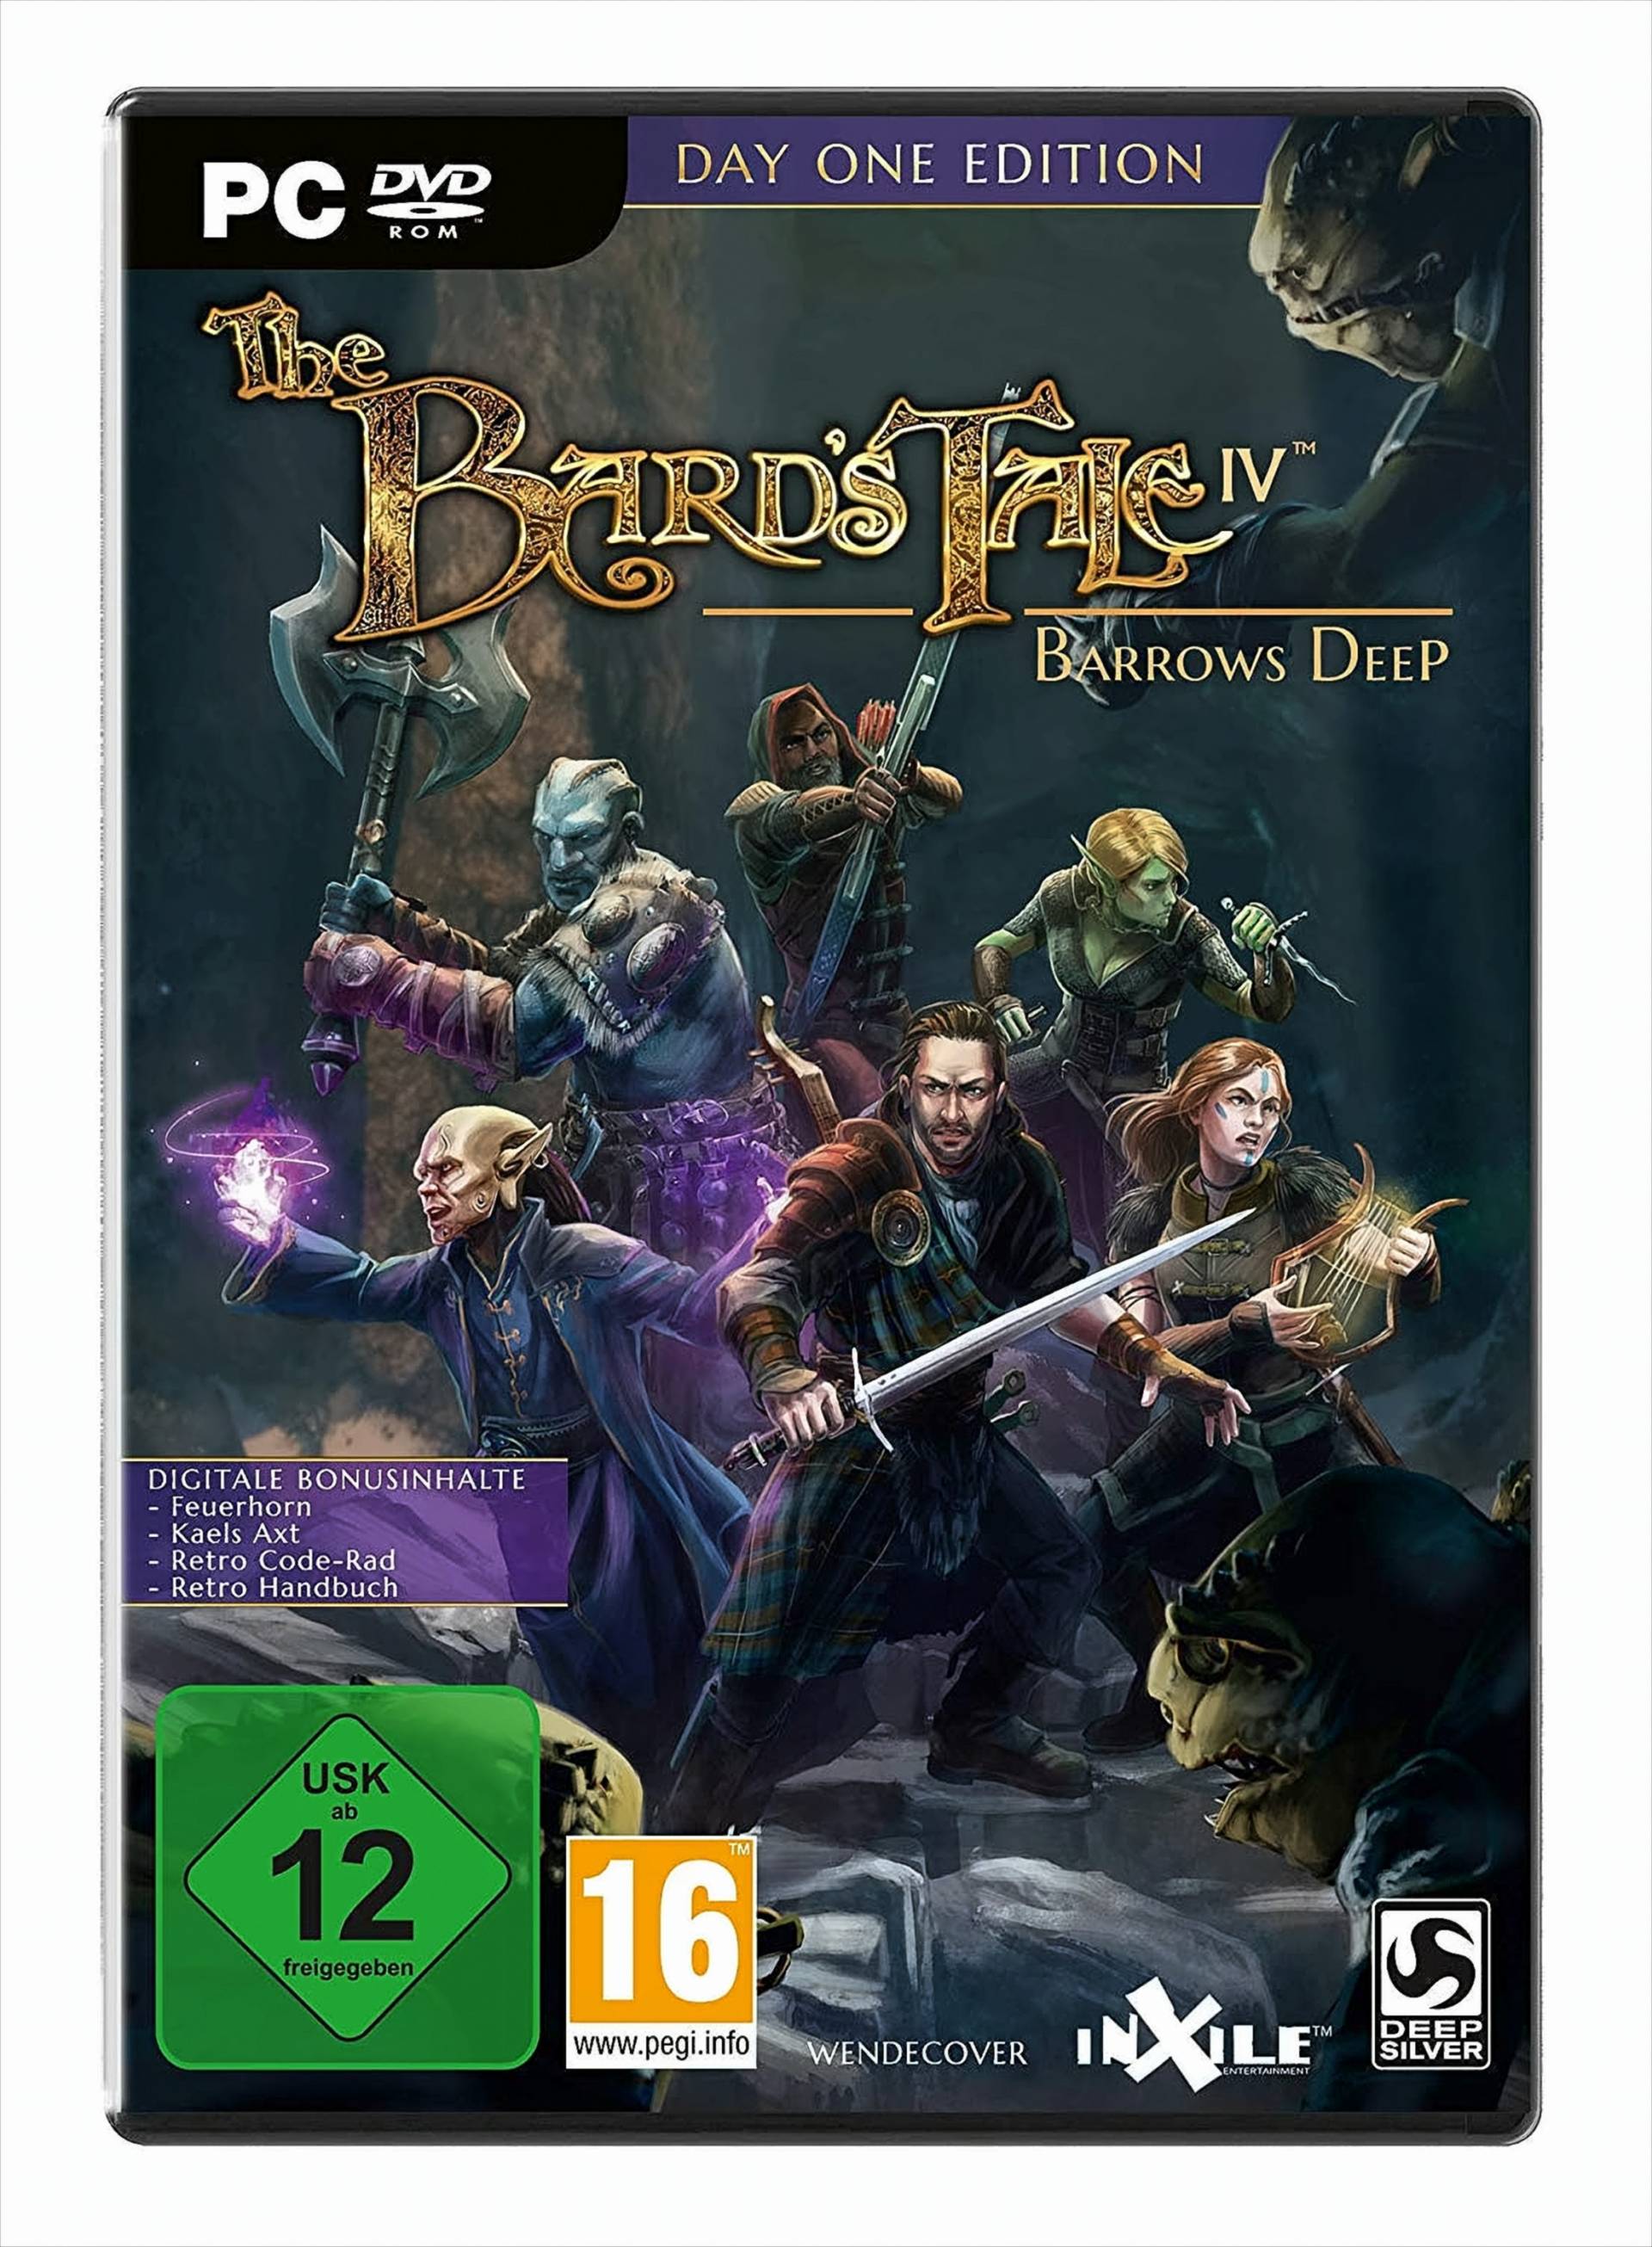 The Bard's Tale IV: Barrows Deep Day One Edition (PC) von Deep Silver